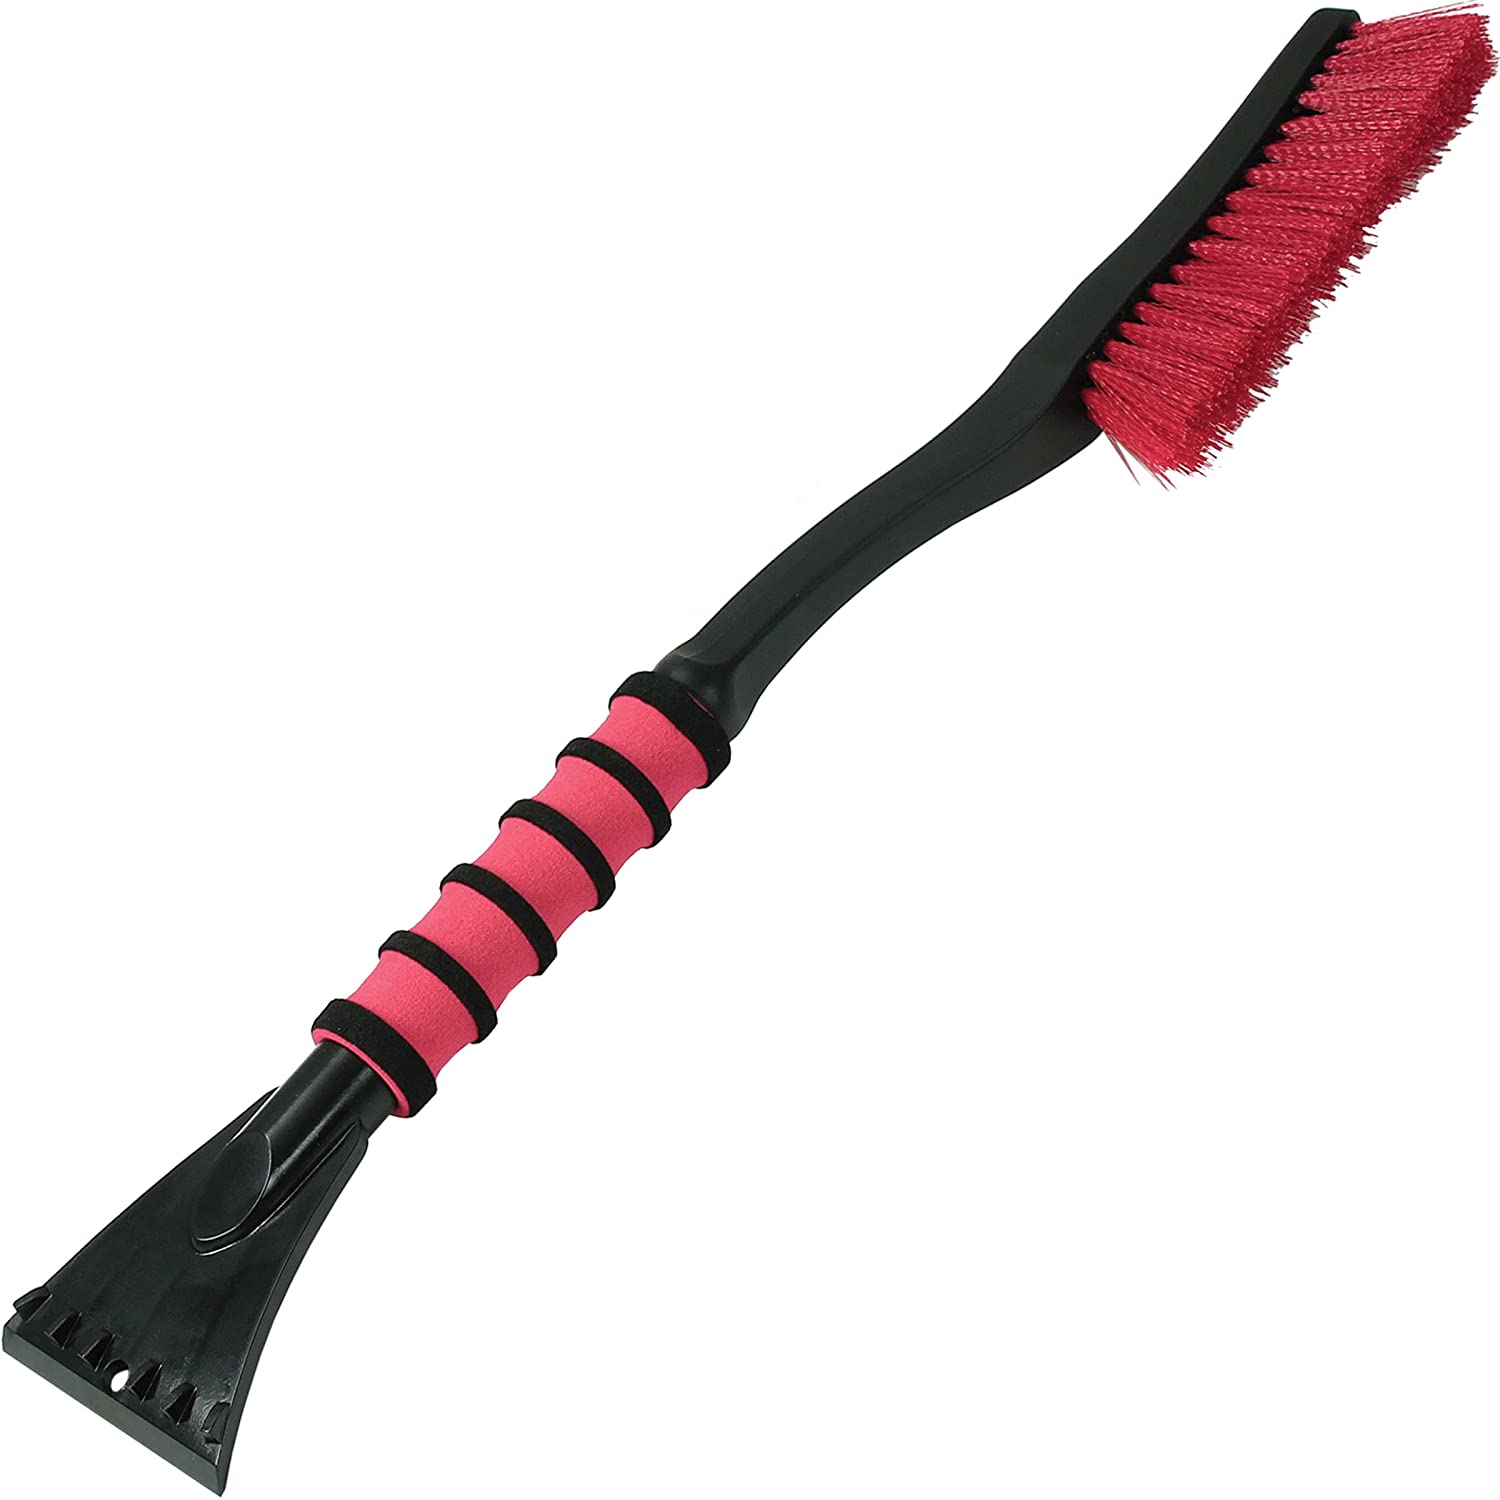 Mallory Cool Tool Snow Brush w/Integrated Scraper w/Foam Grip Handle, ASSORTED COLORS, 26" - image 2 of 8